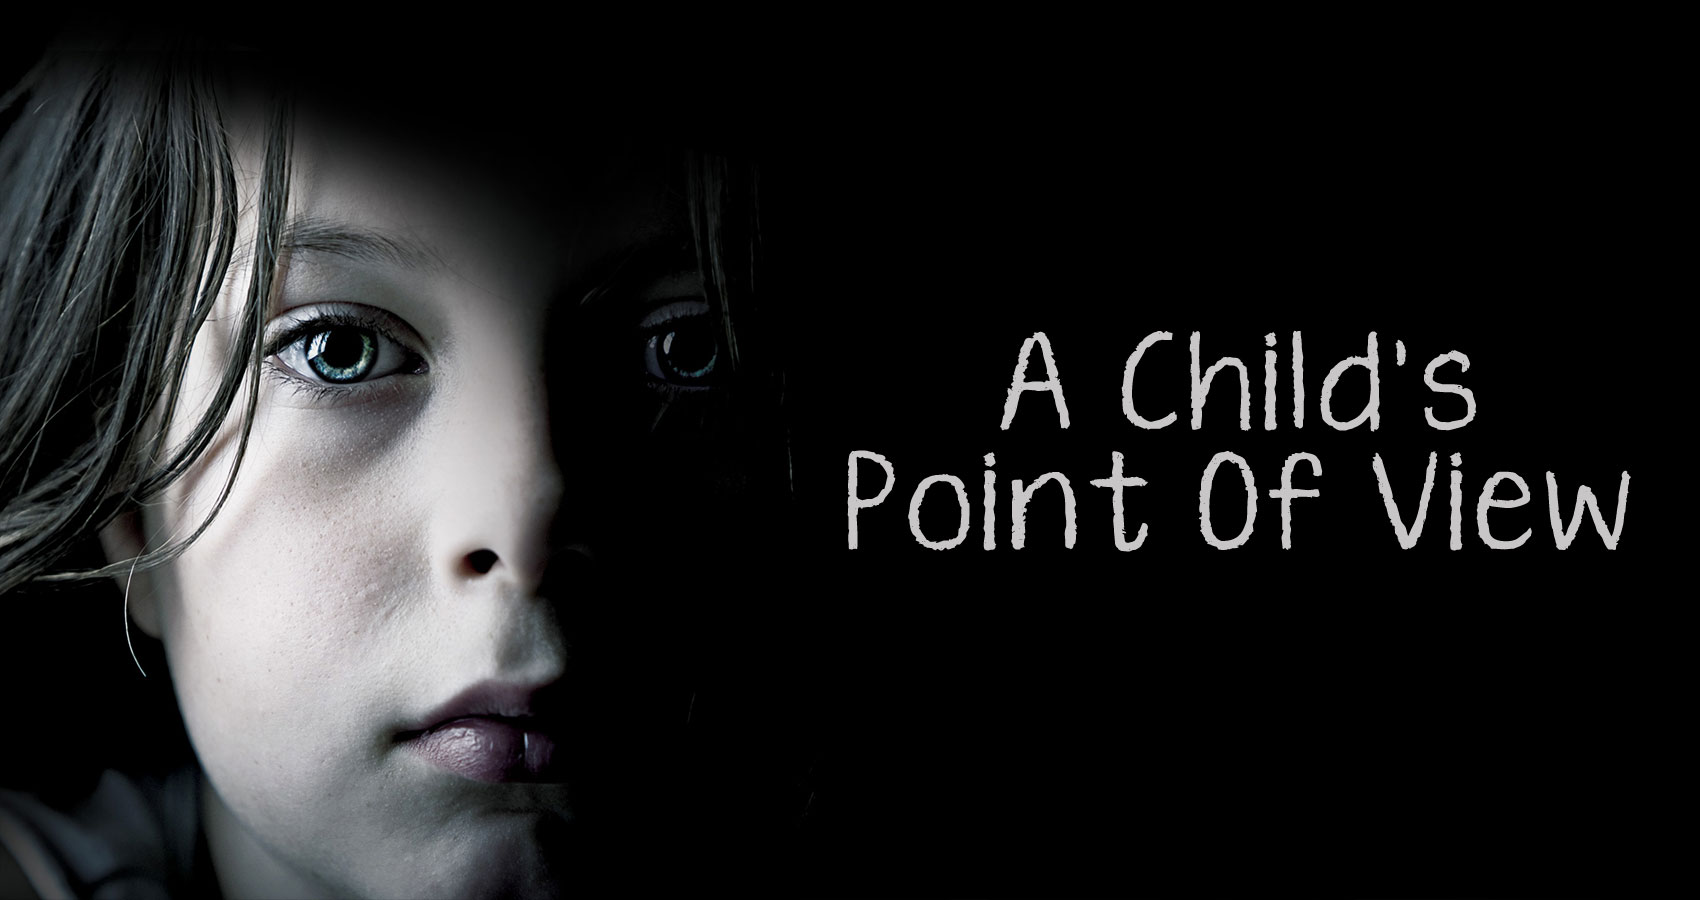 A Child's Point of View by Kia Jones at Spillwords.com